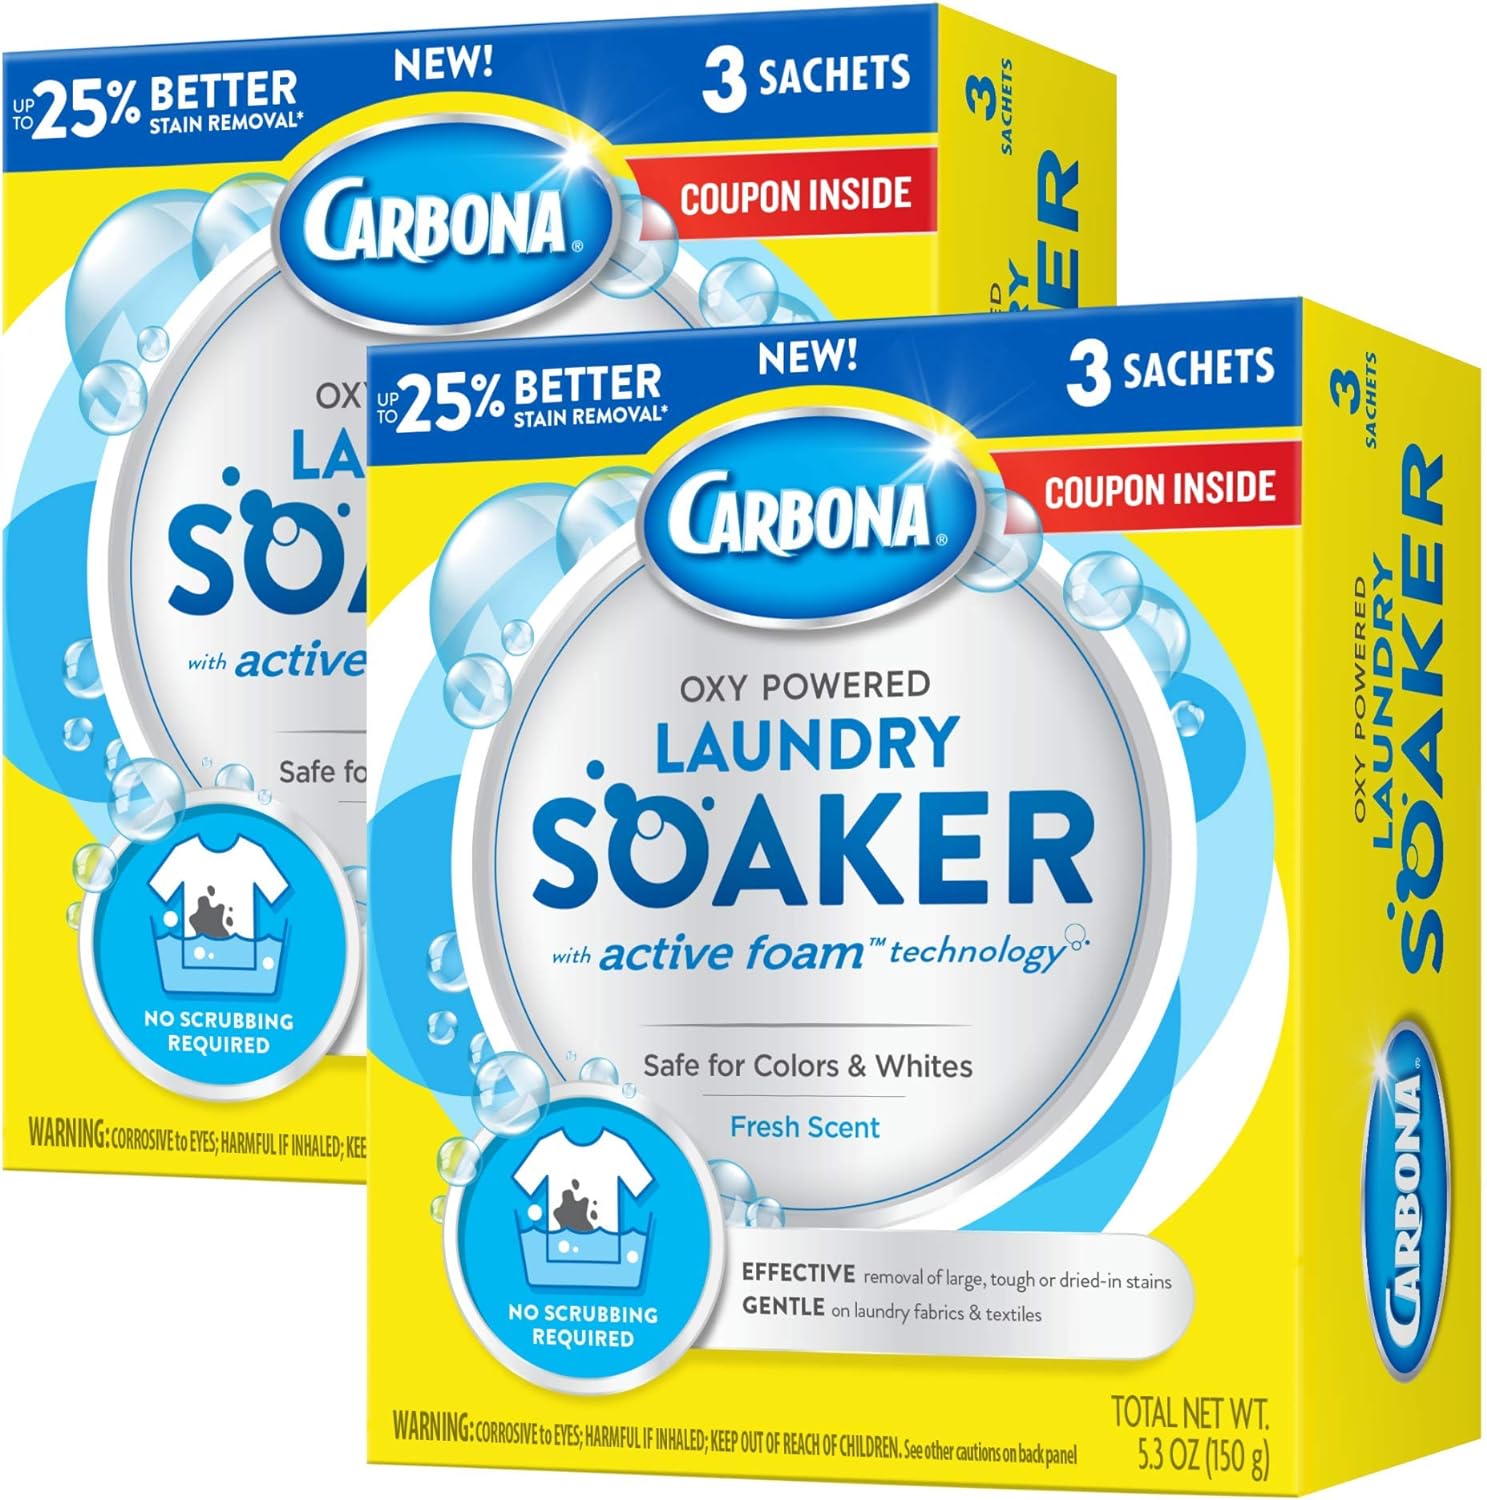 Carbona® Oxy Powered Laundry Soaker with Active Foam Technology | Powerful Stain Remover | Chlorine Bleach Free | Safe on Colors & Whites | 5.3 Oz, 2 Pack